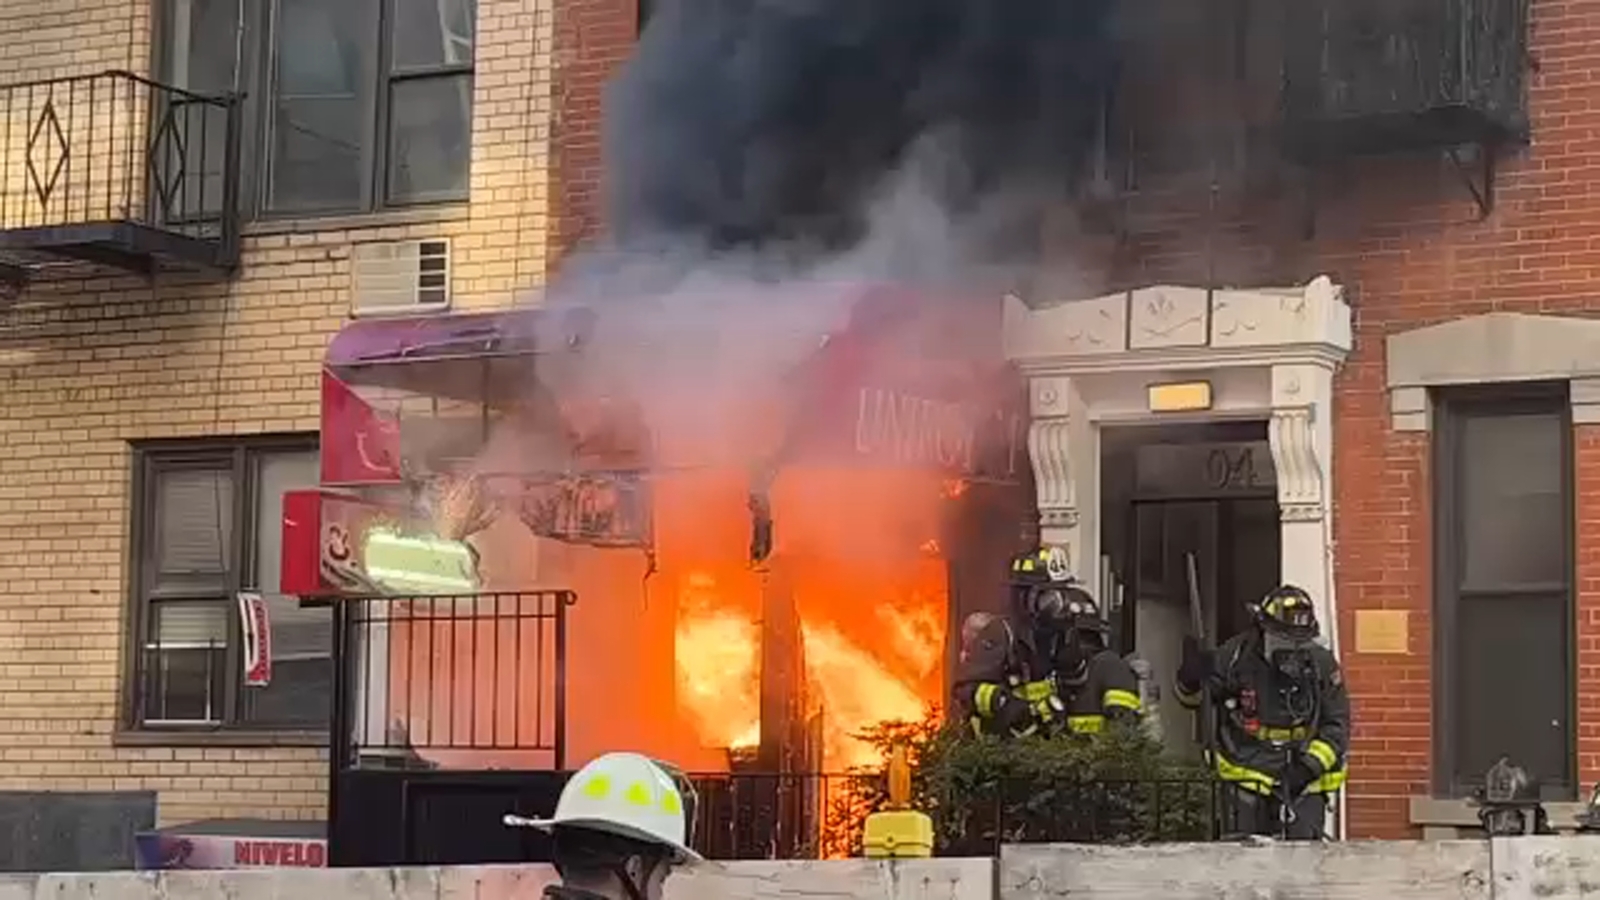 Fire burns through roof of Upper East Side building